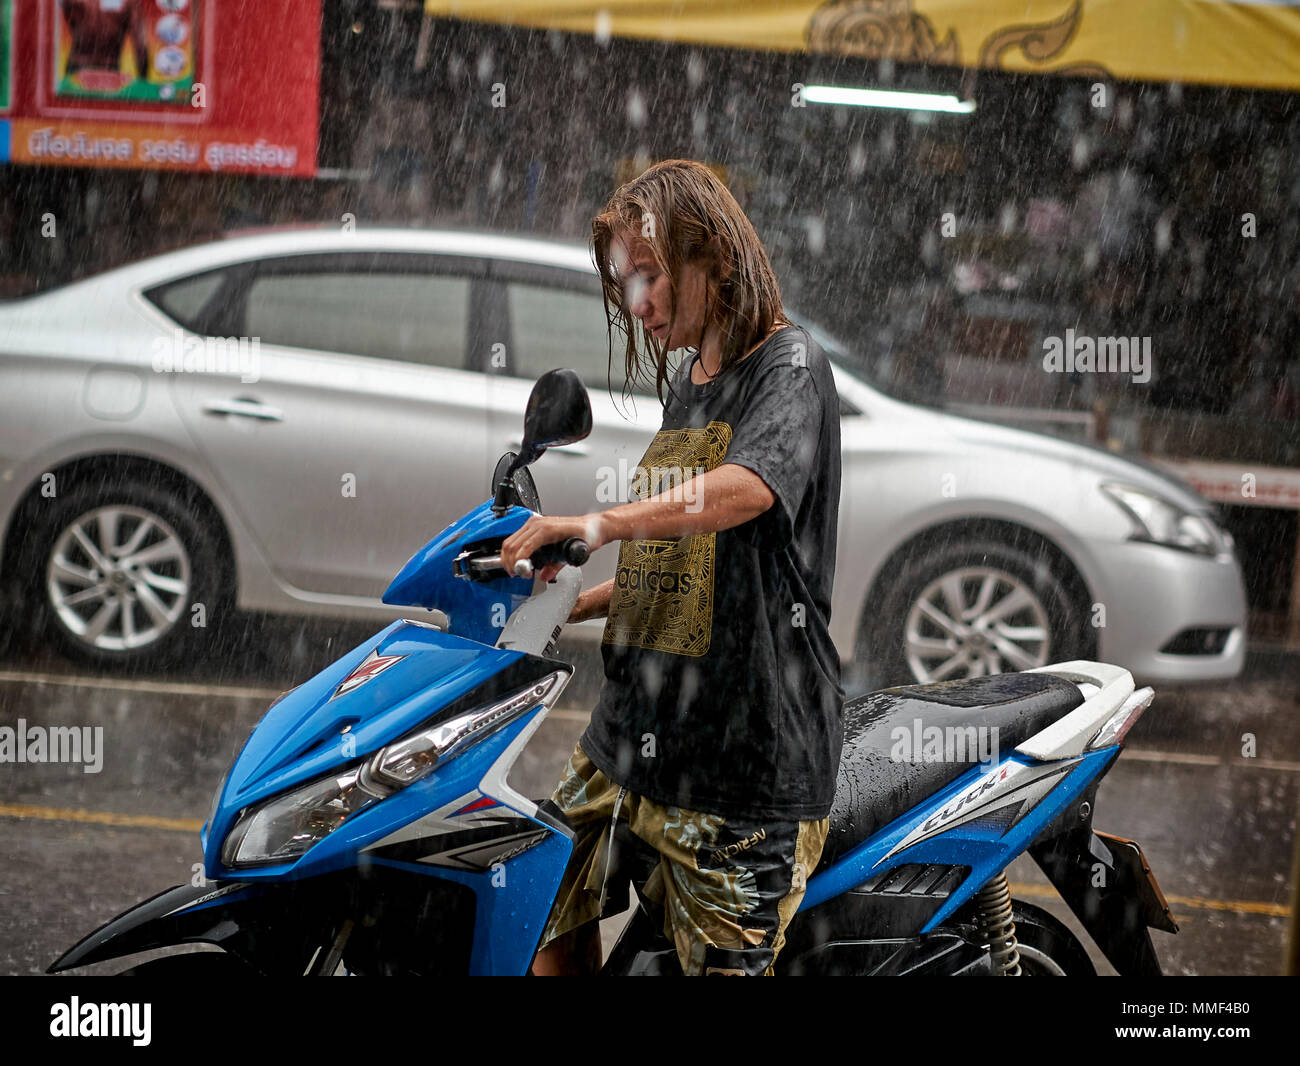 Rain. Woman with motorcycle caught in torrential rainfall. Thailand monsoon season. Southeast Asia. Stock Photo